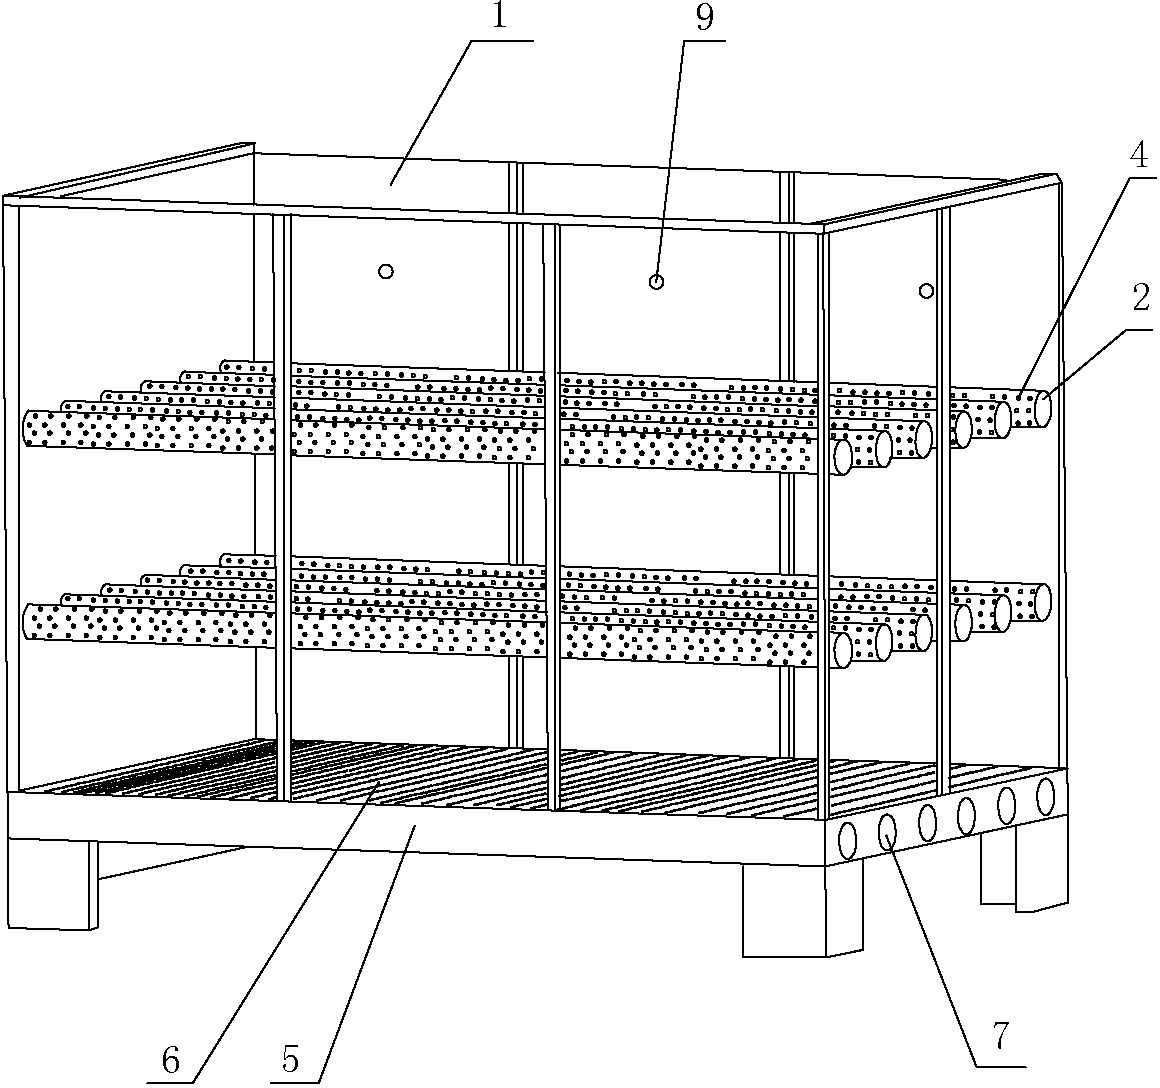 Grain drying and storing granary